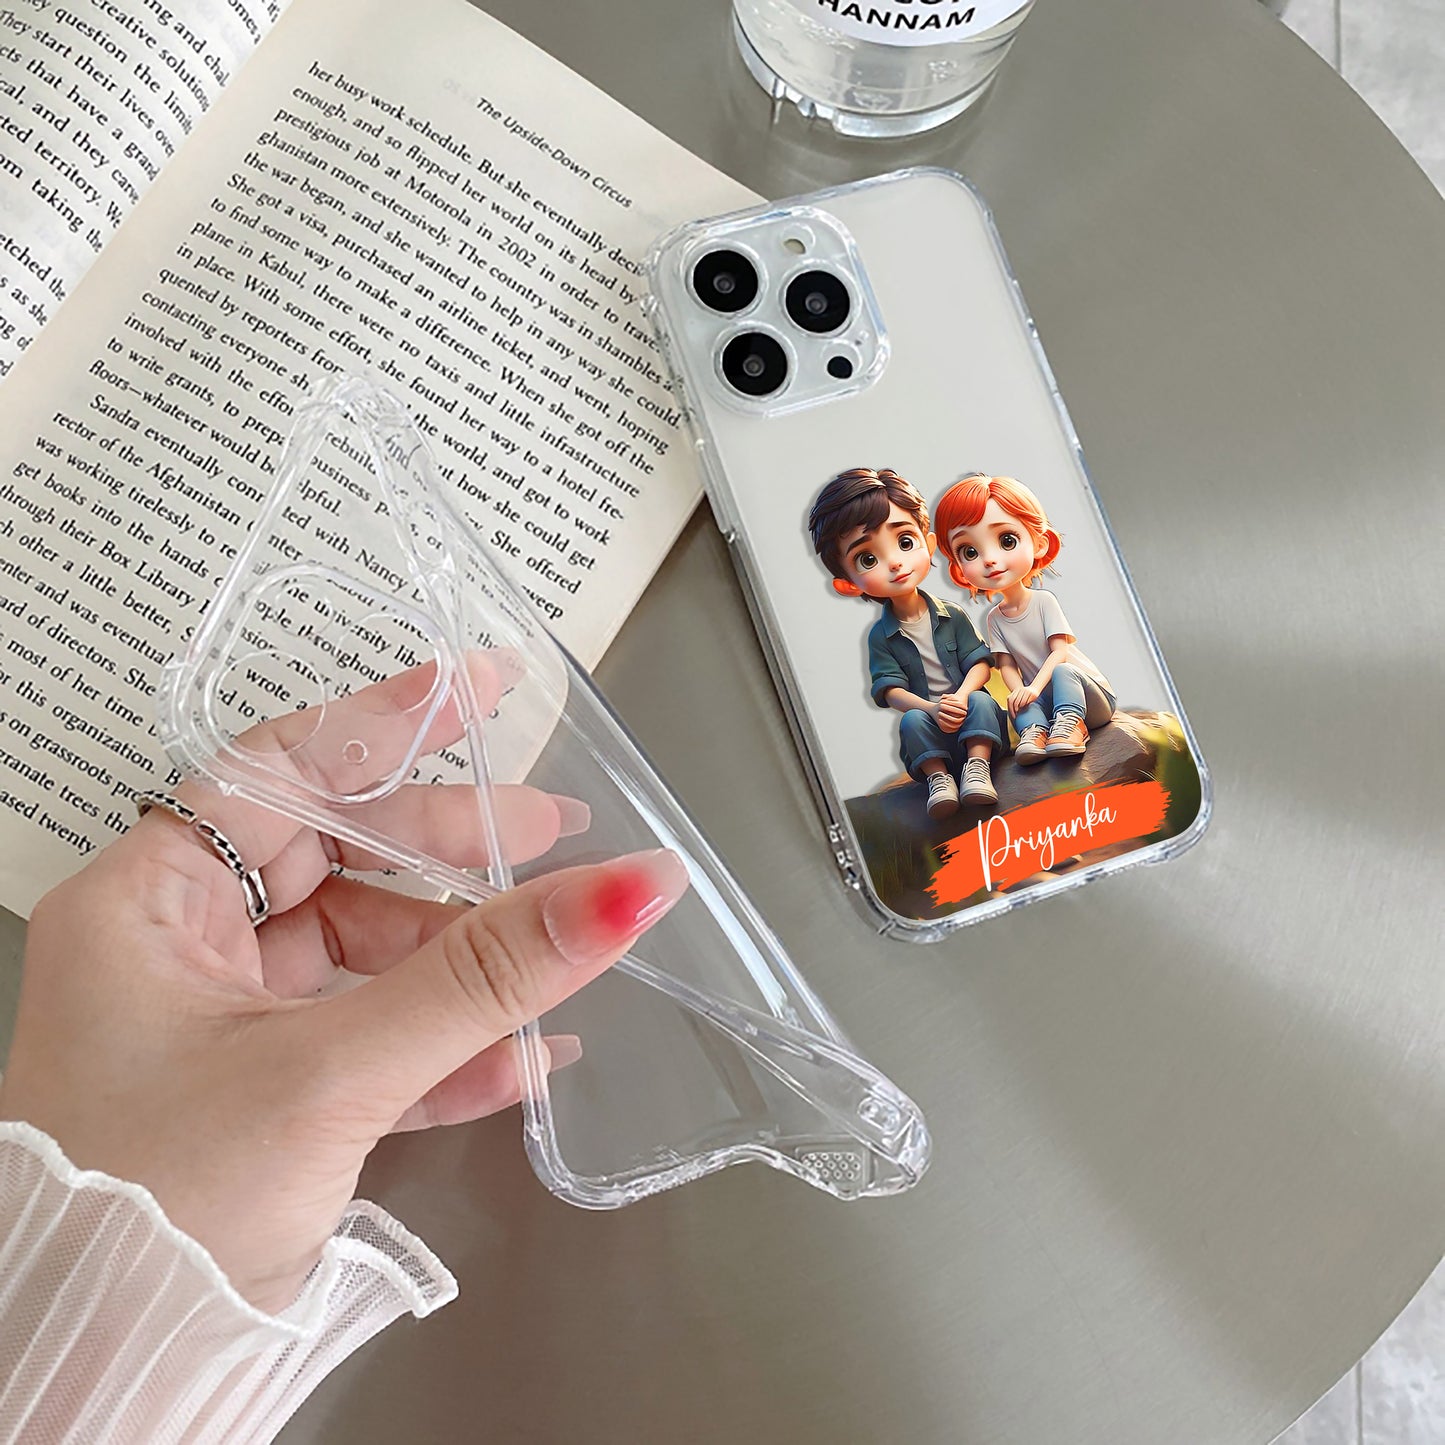 Cute Love Couple Customize Transparent Silicon Case For iPhone